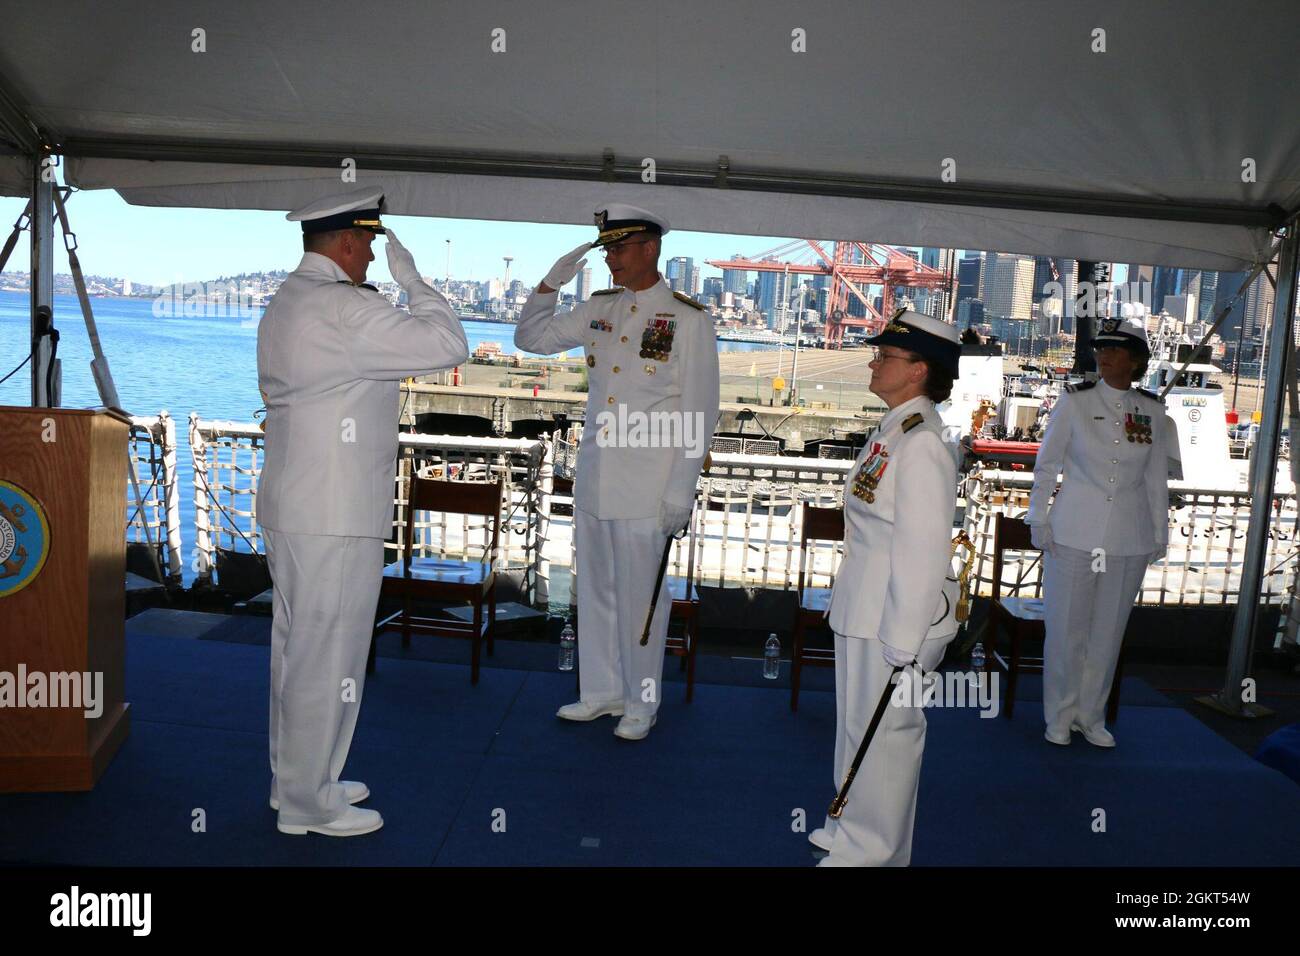 Coast Guard Rear Adm. Peter W. Gautier, acting commander, U.S. Coast Guard Pacific Area and Defense Forces West, salutes Capt. Kenneth J. Boda during the Coast Guard Cutter Healy (WAGB 20) change of command ceremony aboard the cutter moored at Base Seattle, June 25, 2021. Boda relieved Capt. Mary Ellen J. Durley as Healy’s commanding officer during the ceremony. Stock Photo